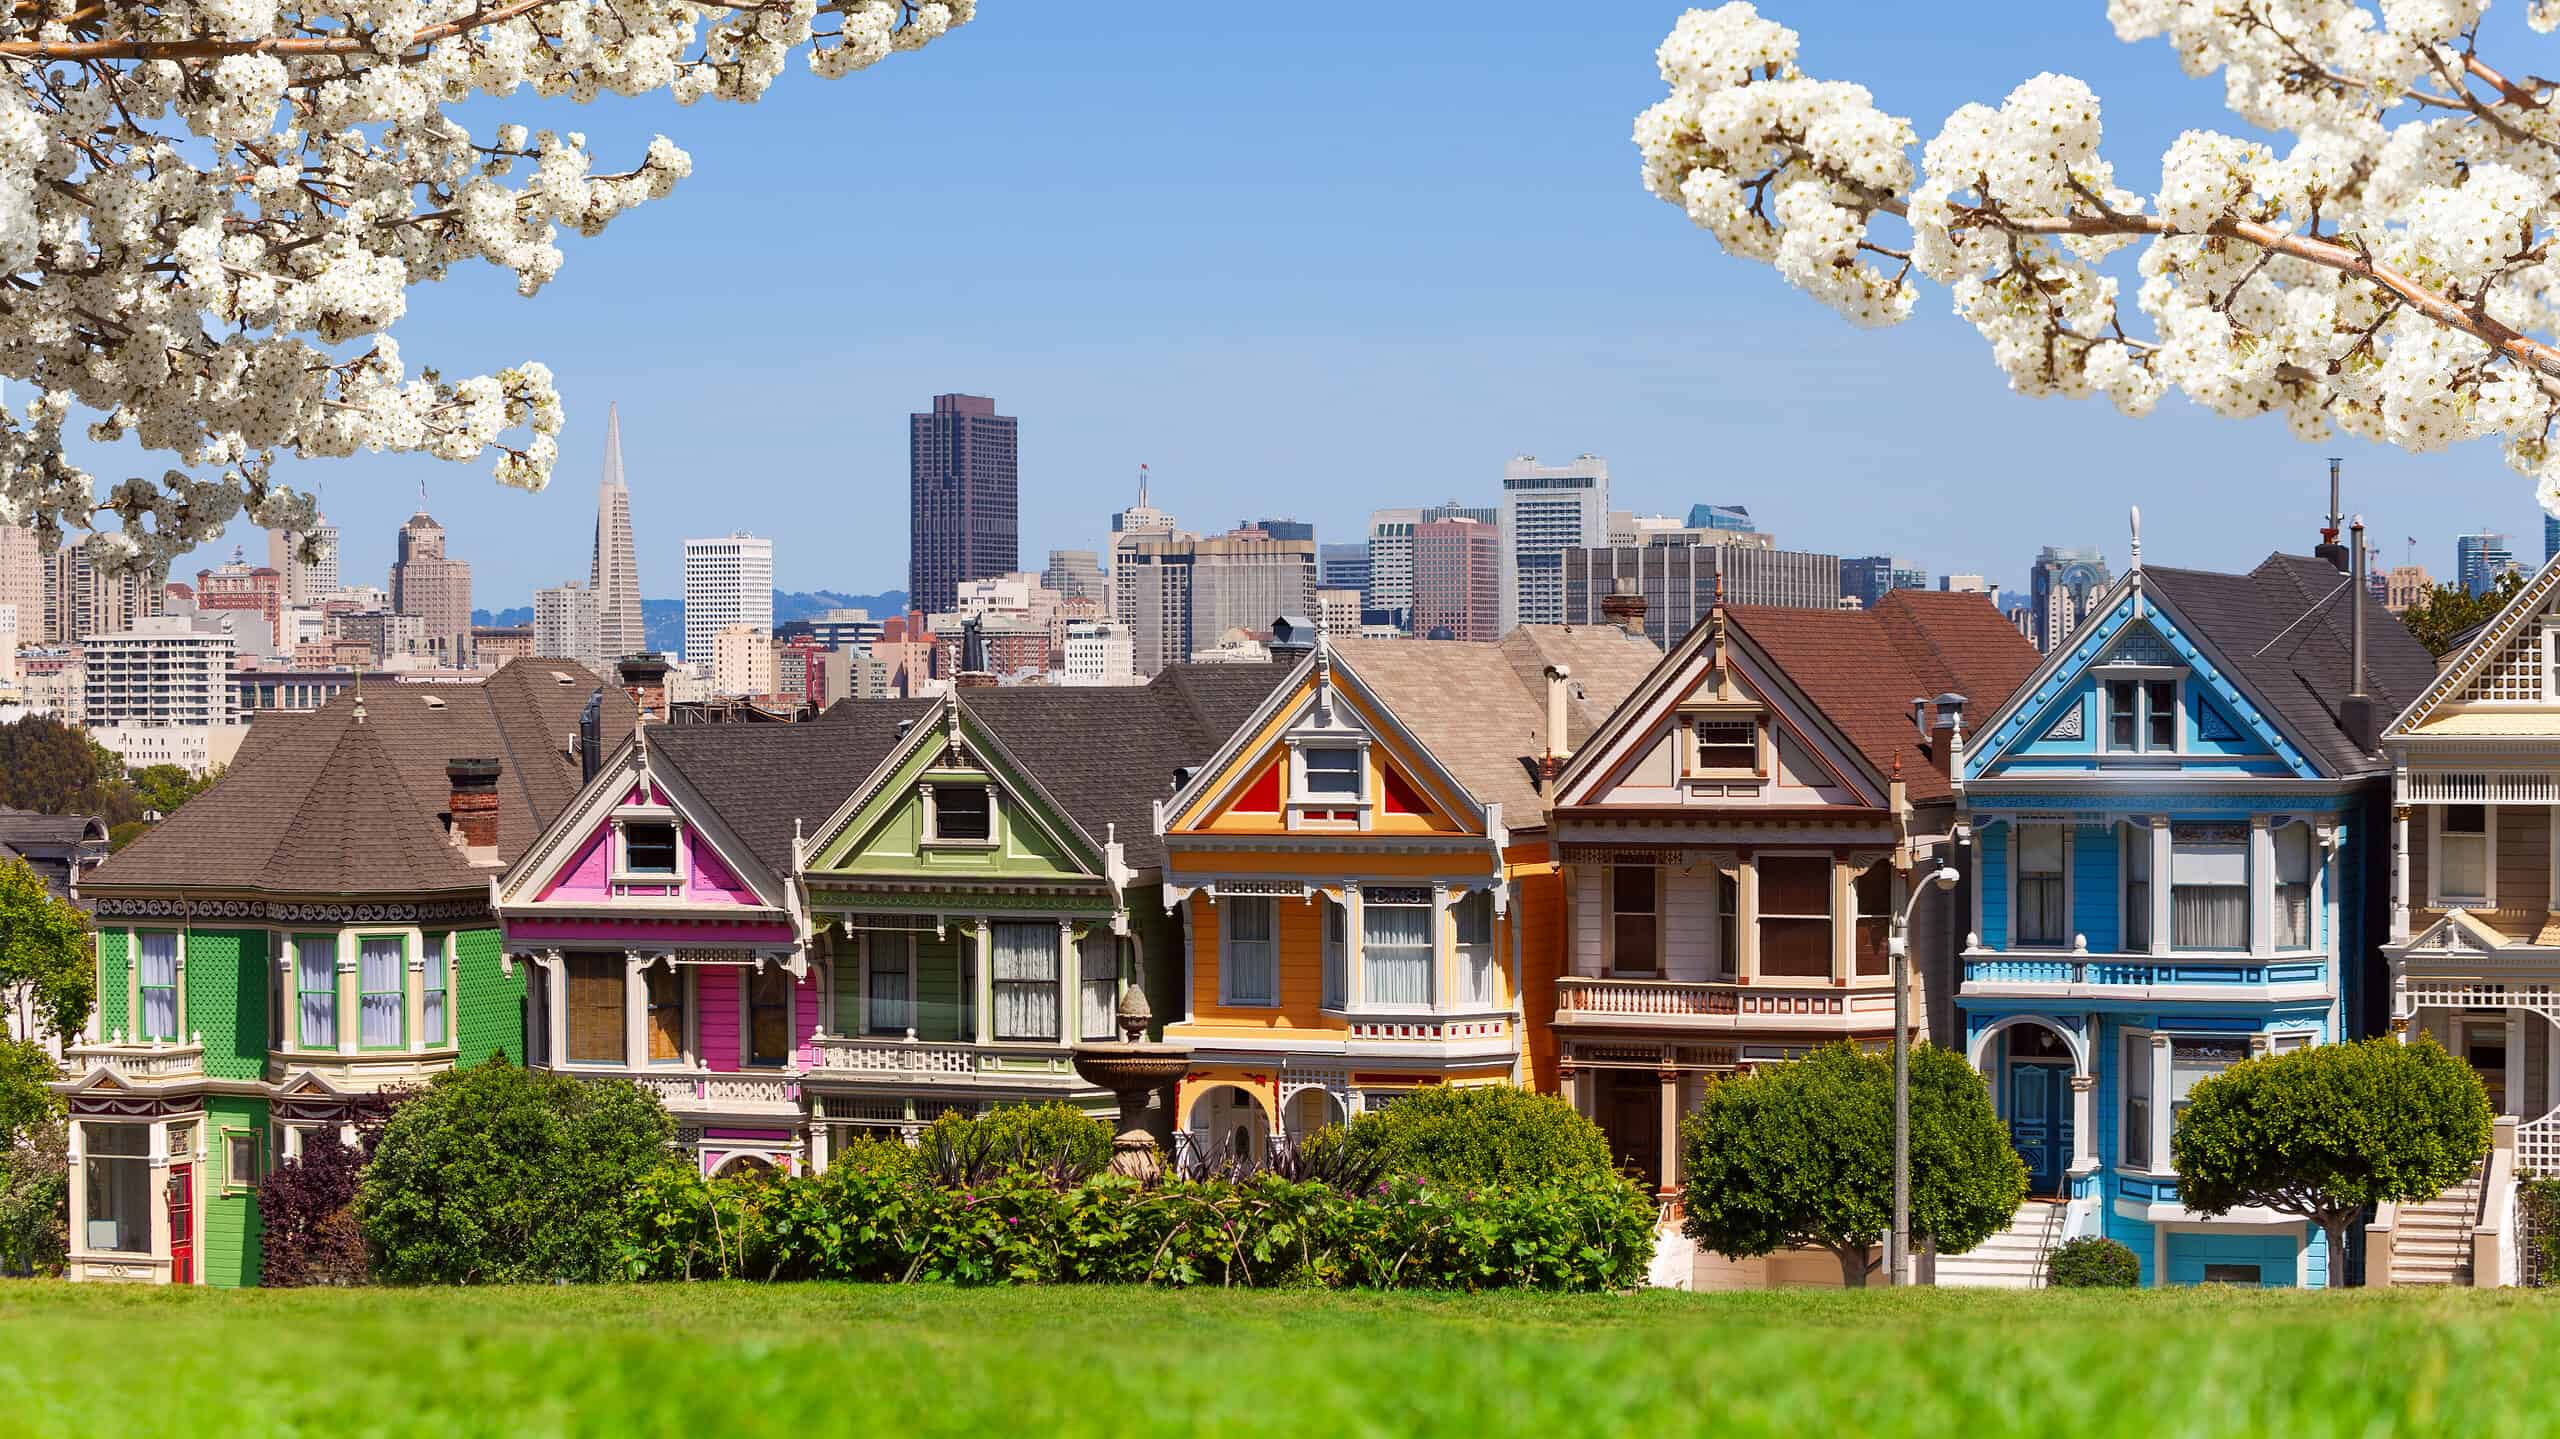 San Francisco is picturesque when the spring cherry blossoms are in bloom.